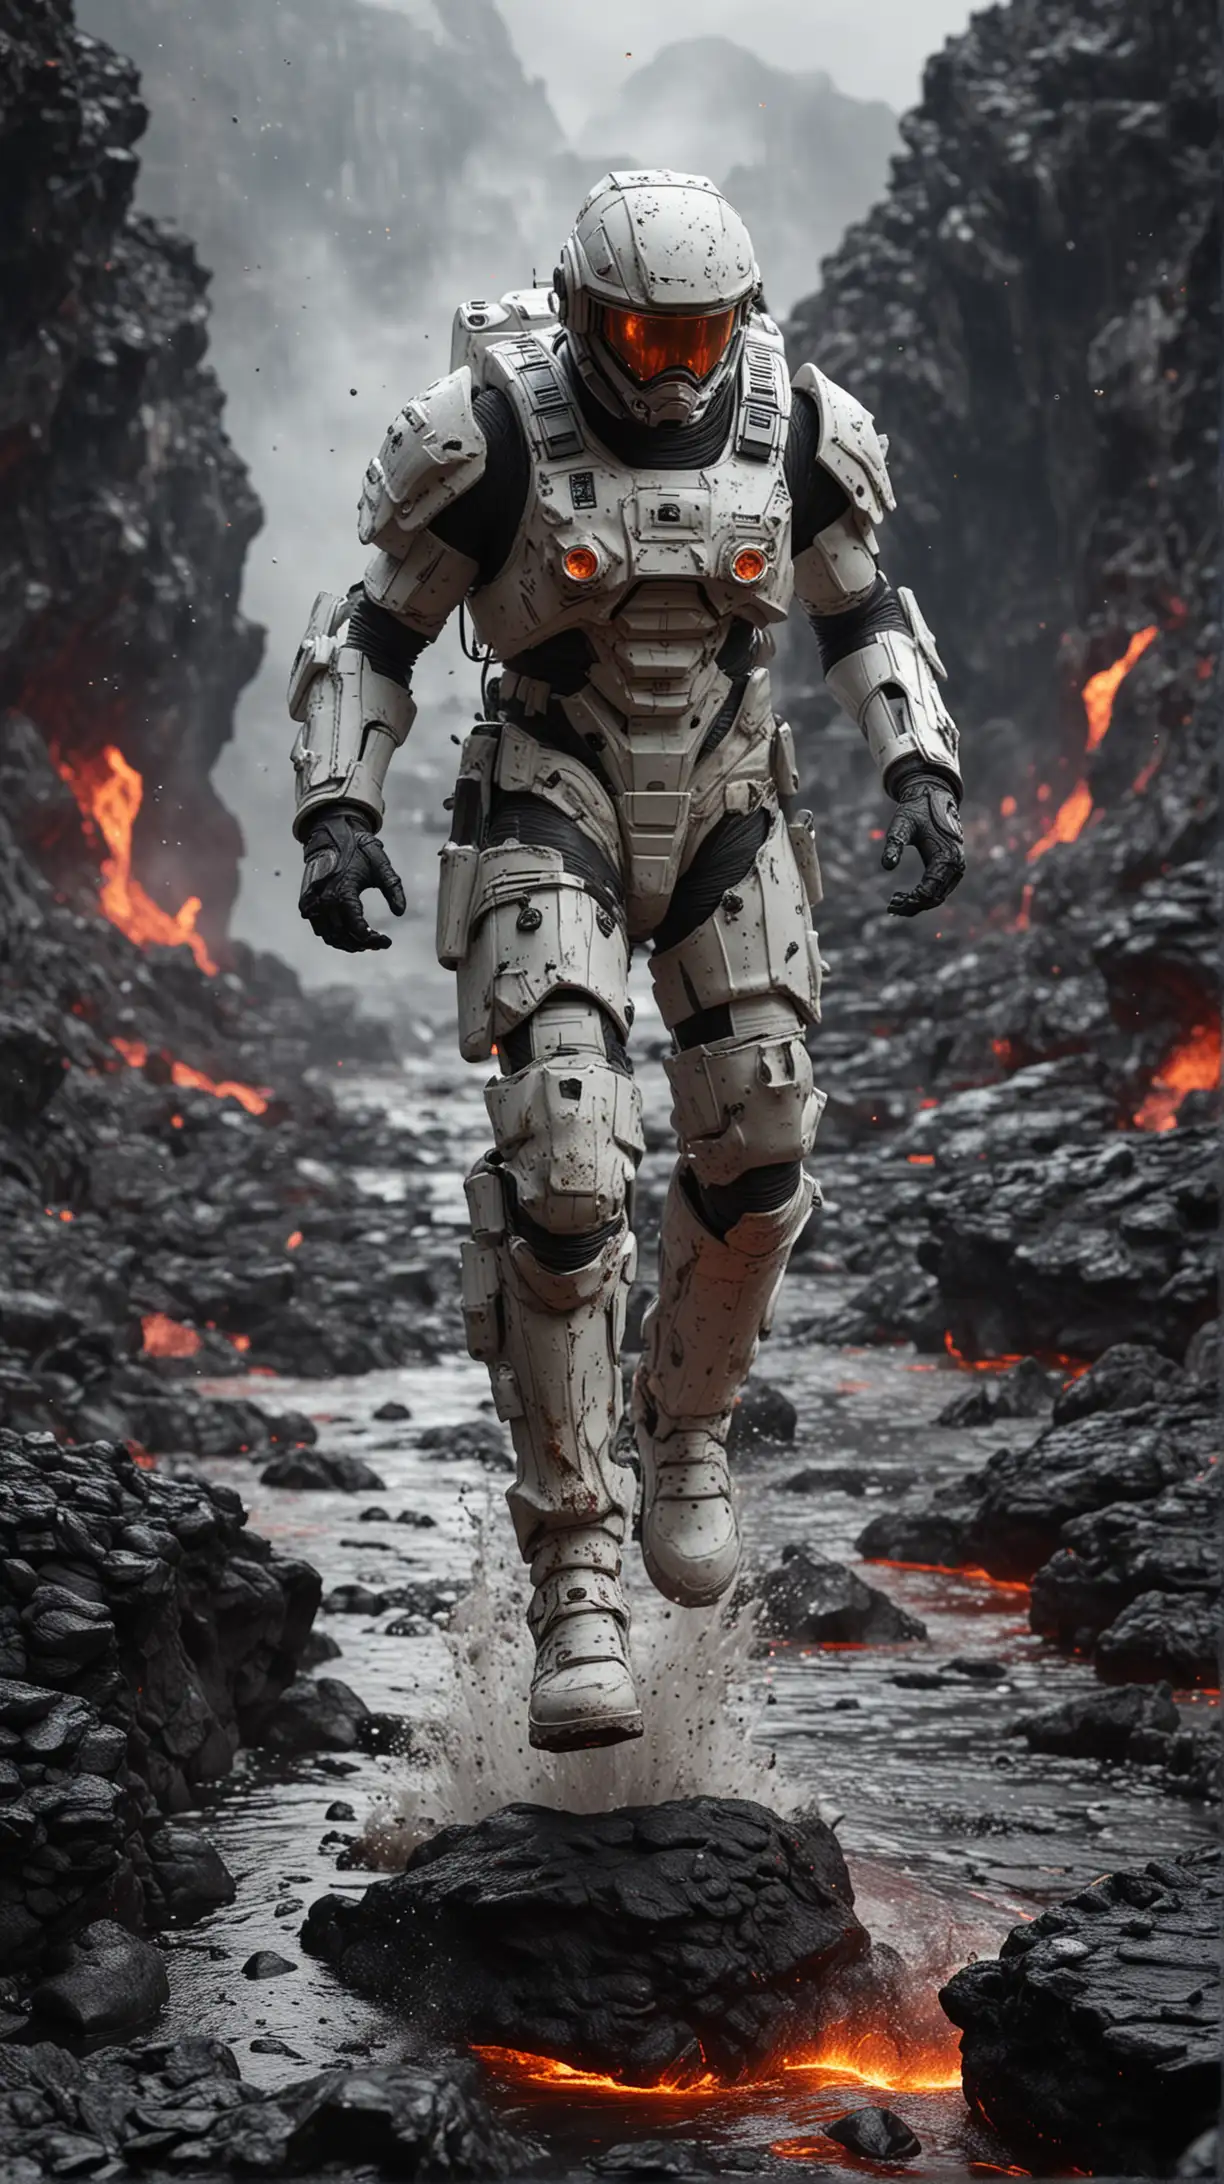 Dynamic Space Soldier Leaping over Lava Field